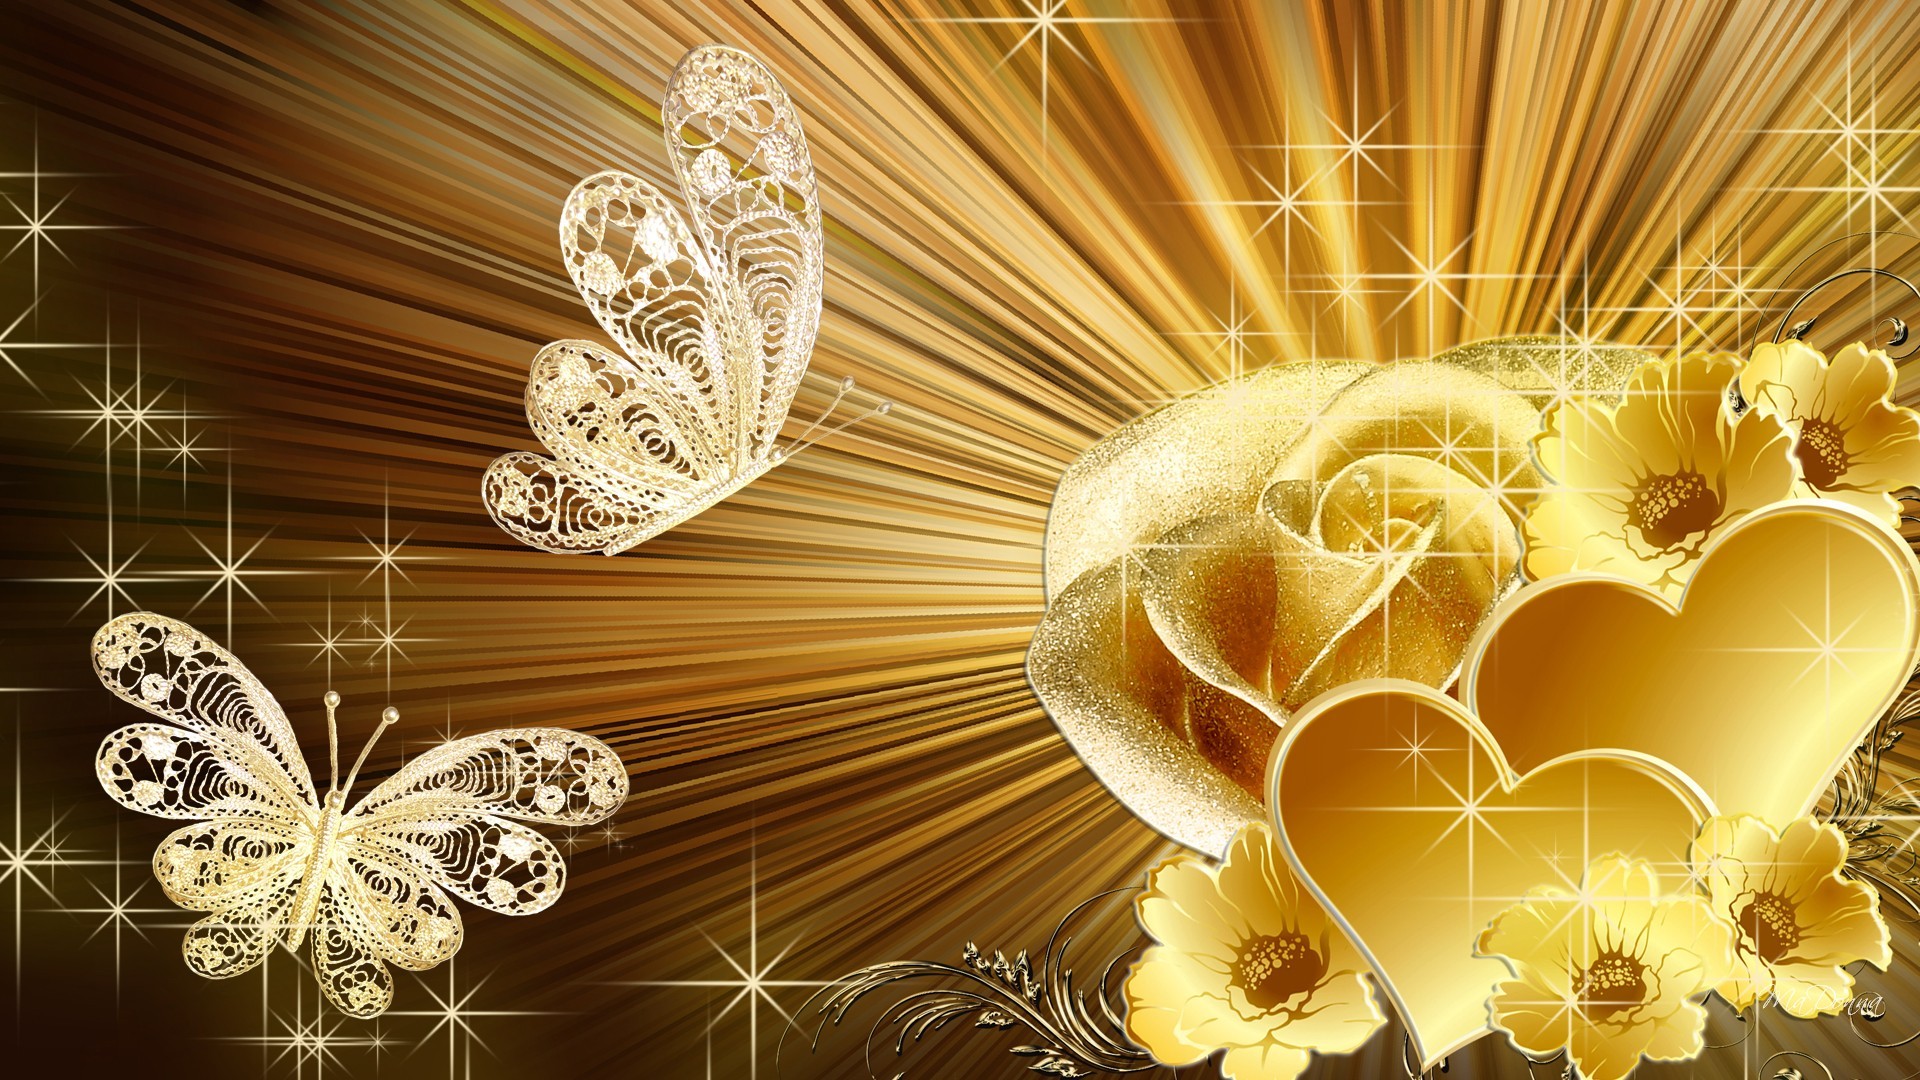 Gold Roses On A Red Background With Flying Around The Butterfly, Space,  Abstract, Il Background Image And Wallpaper for Free Download